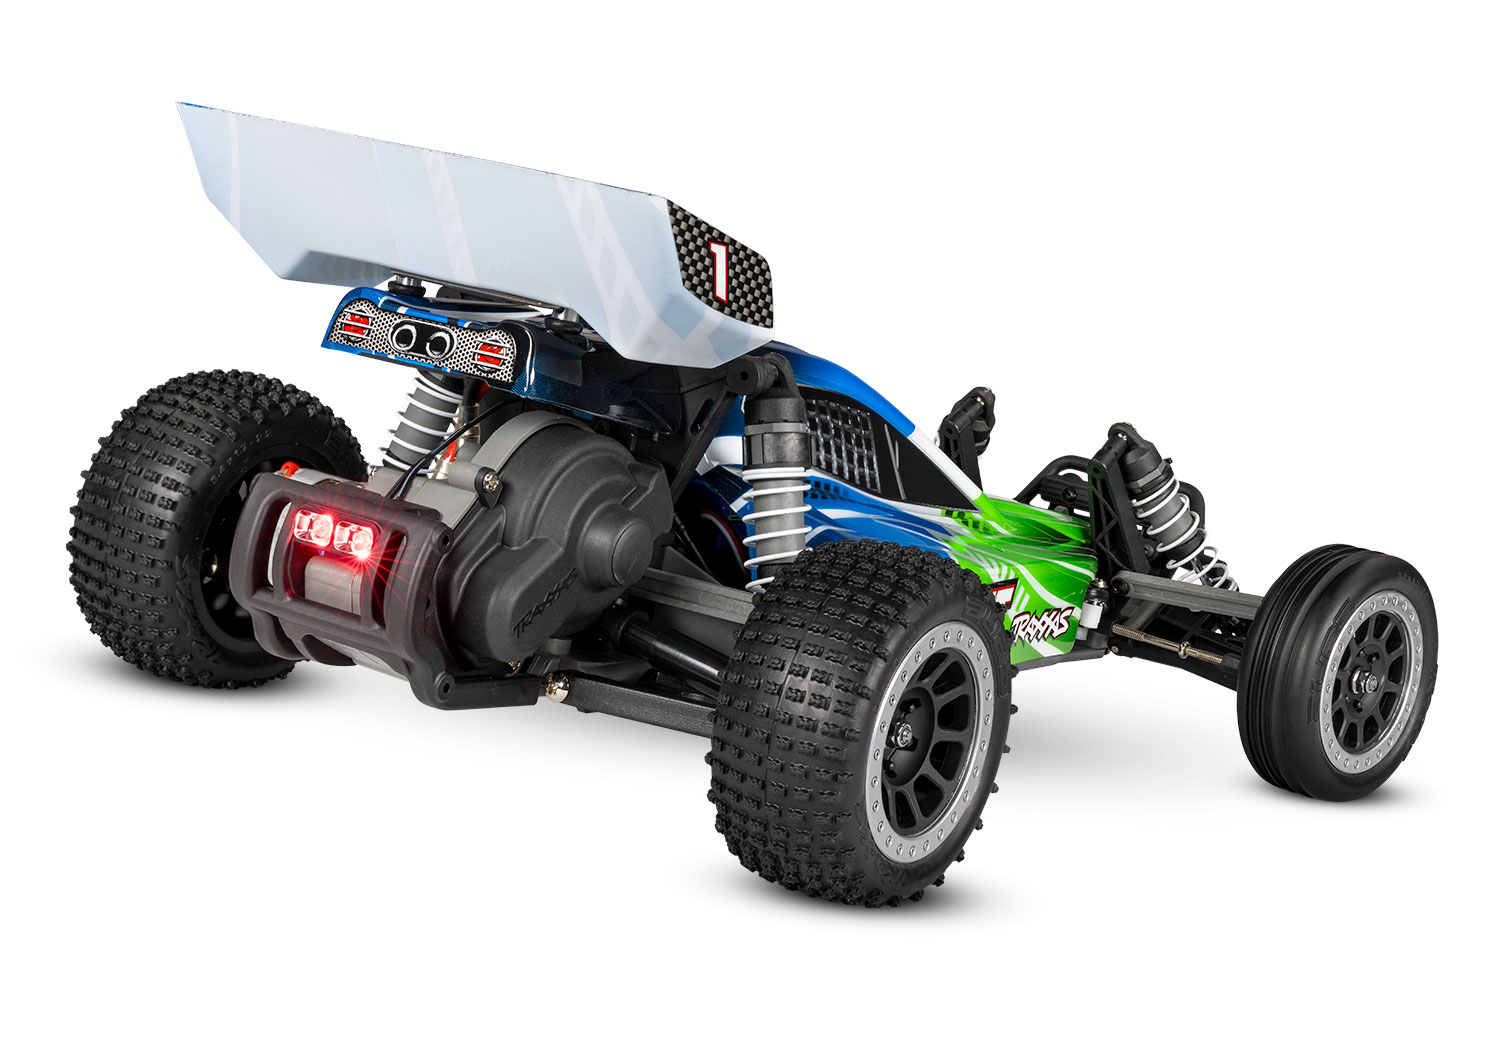 Traxxas Bandit XL5 2WD electro buggy RTR 2.4Ghz met LED verlichting inclusief Power Pack - Groen